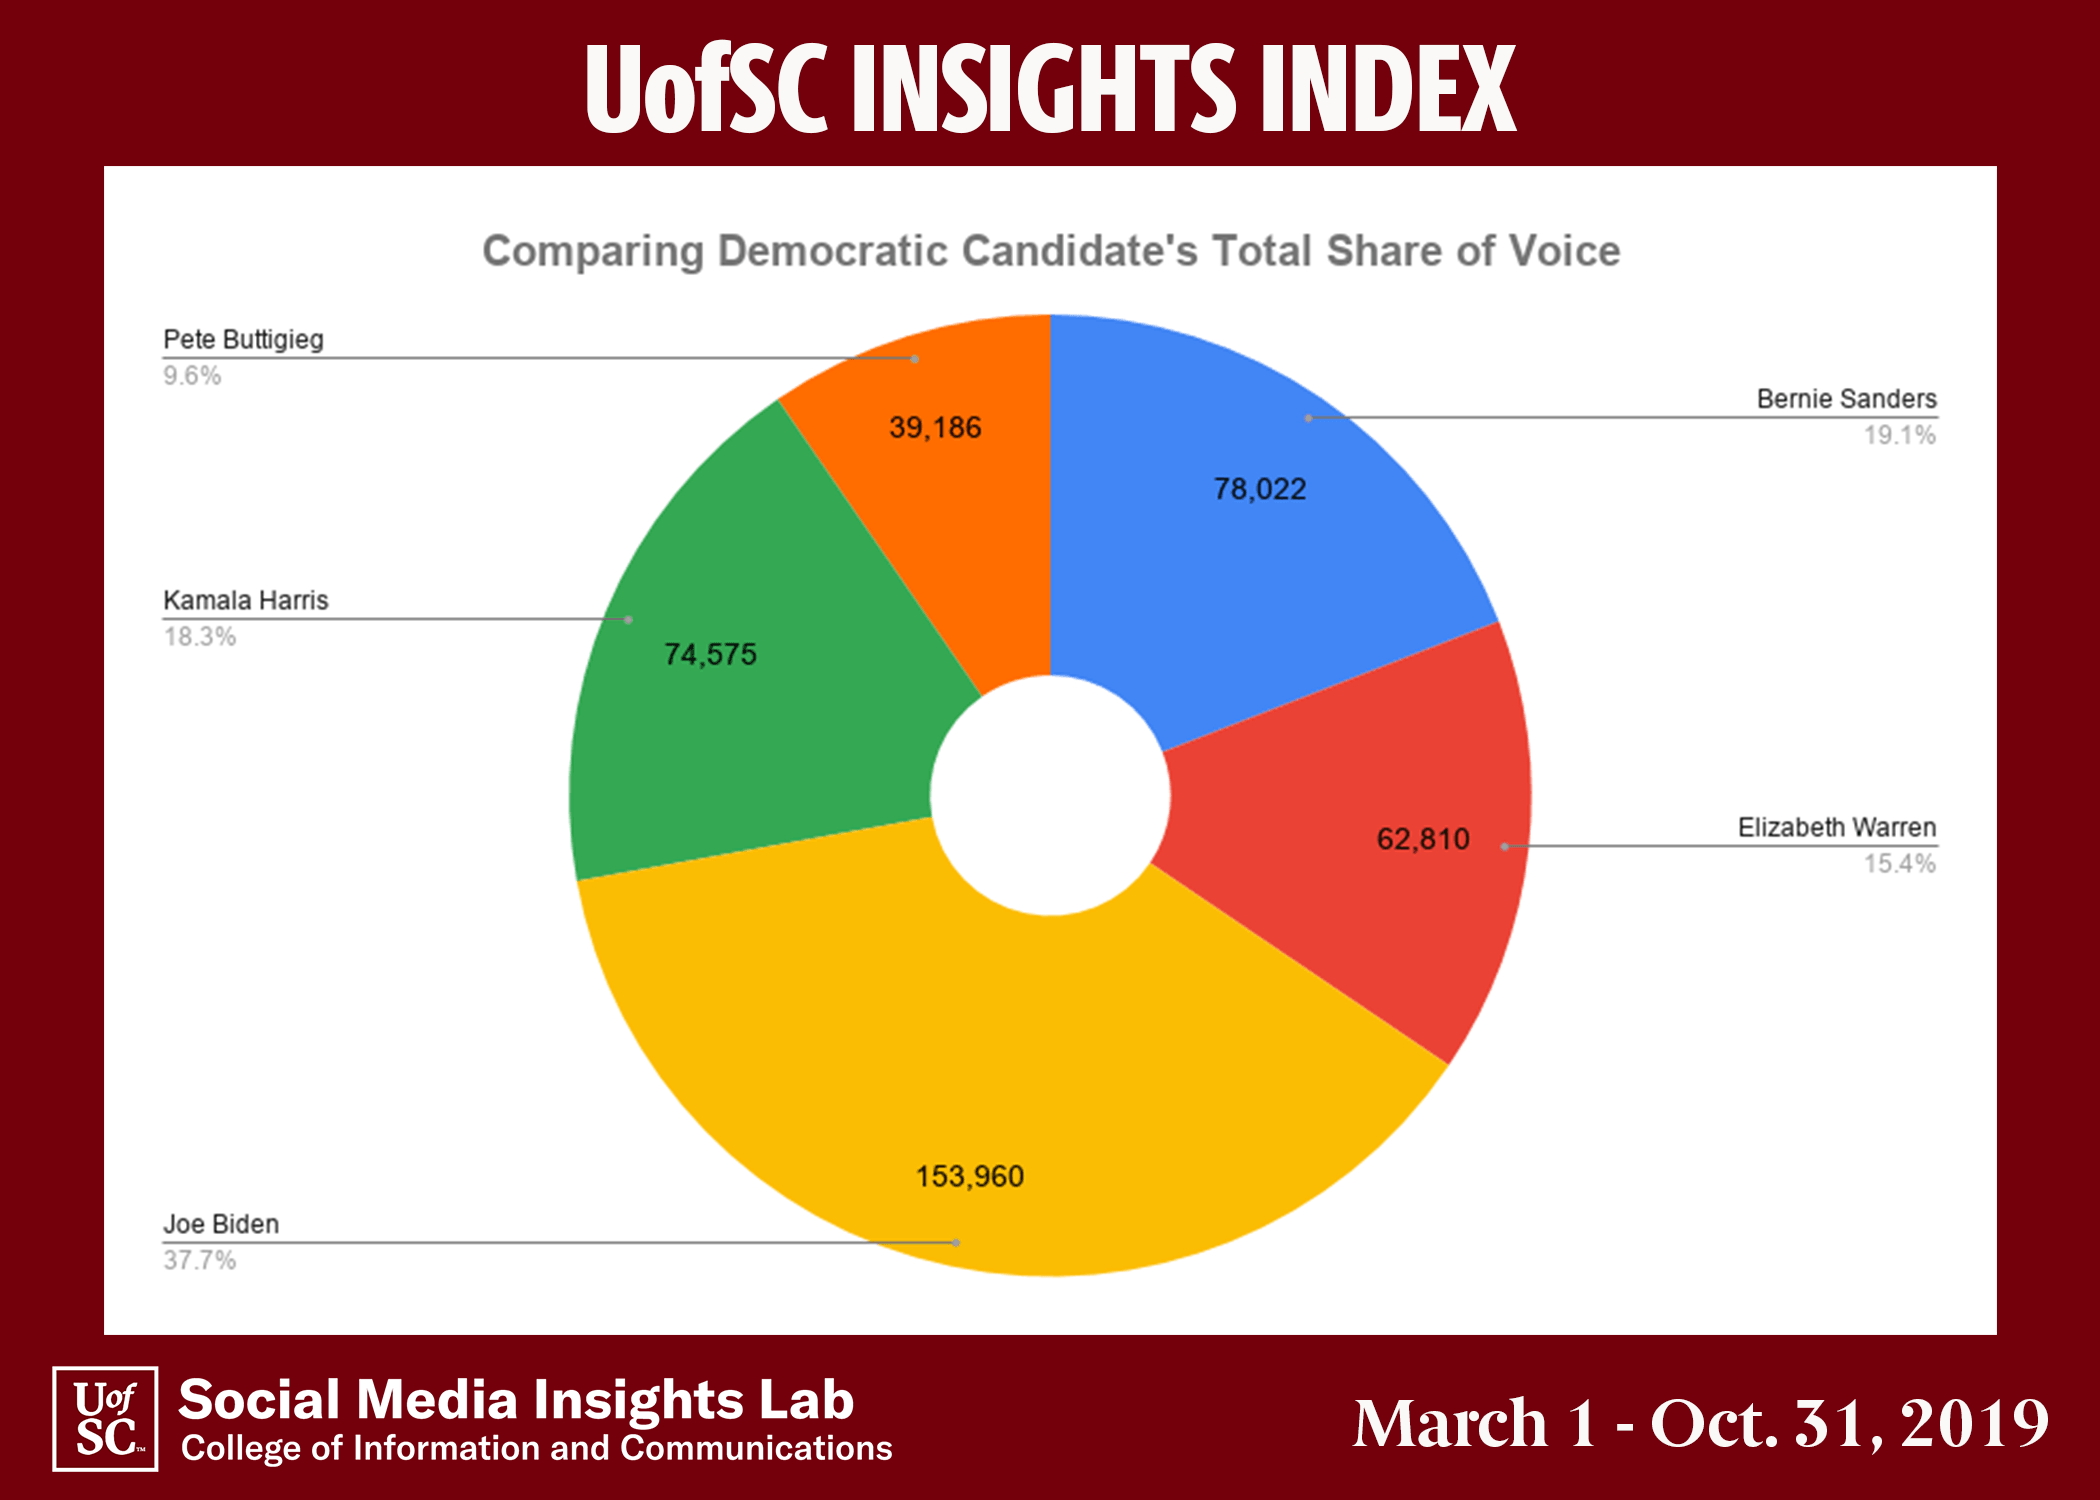 The lab’s analysis of South Carolina social media conversations shows that former vice president Joe Biden hols the largest share of voice (38 percent). He is followed by Sanders (19 percent), Harris (18 percent) and Warren (15 percent). Buttigieg has the lowest share of voice (10 percent), despite having the highest positive sentiment.